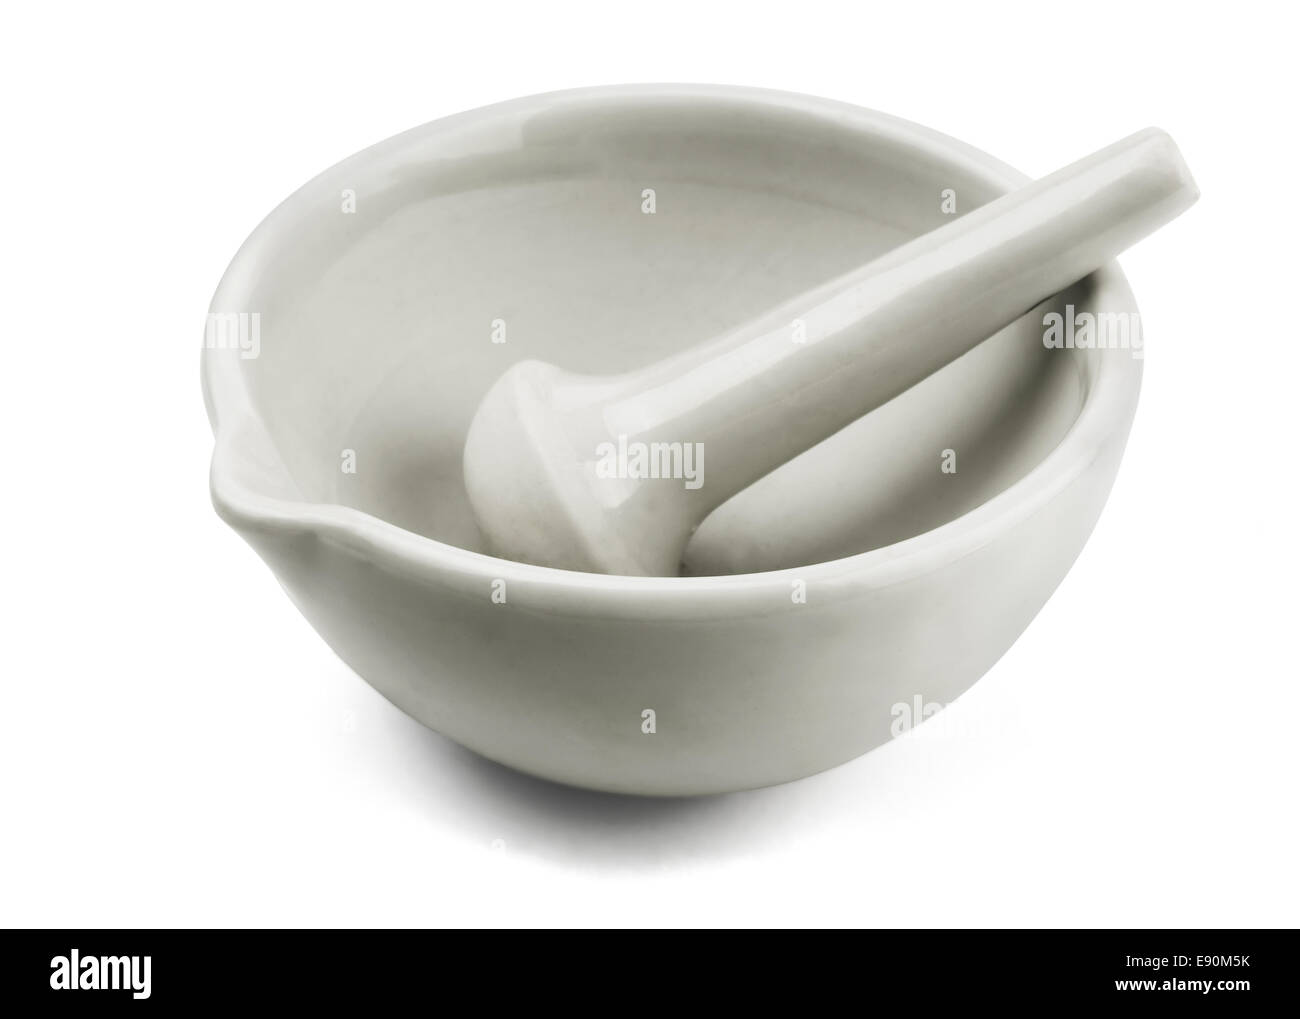 Mortar and Pestle Stock Photo